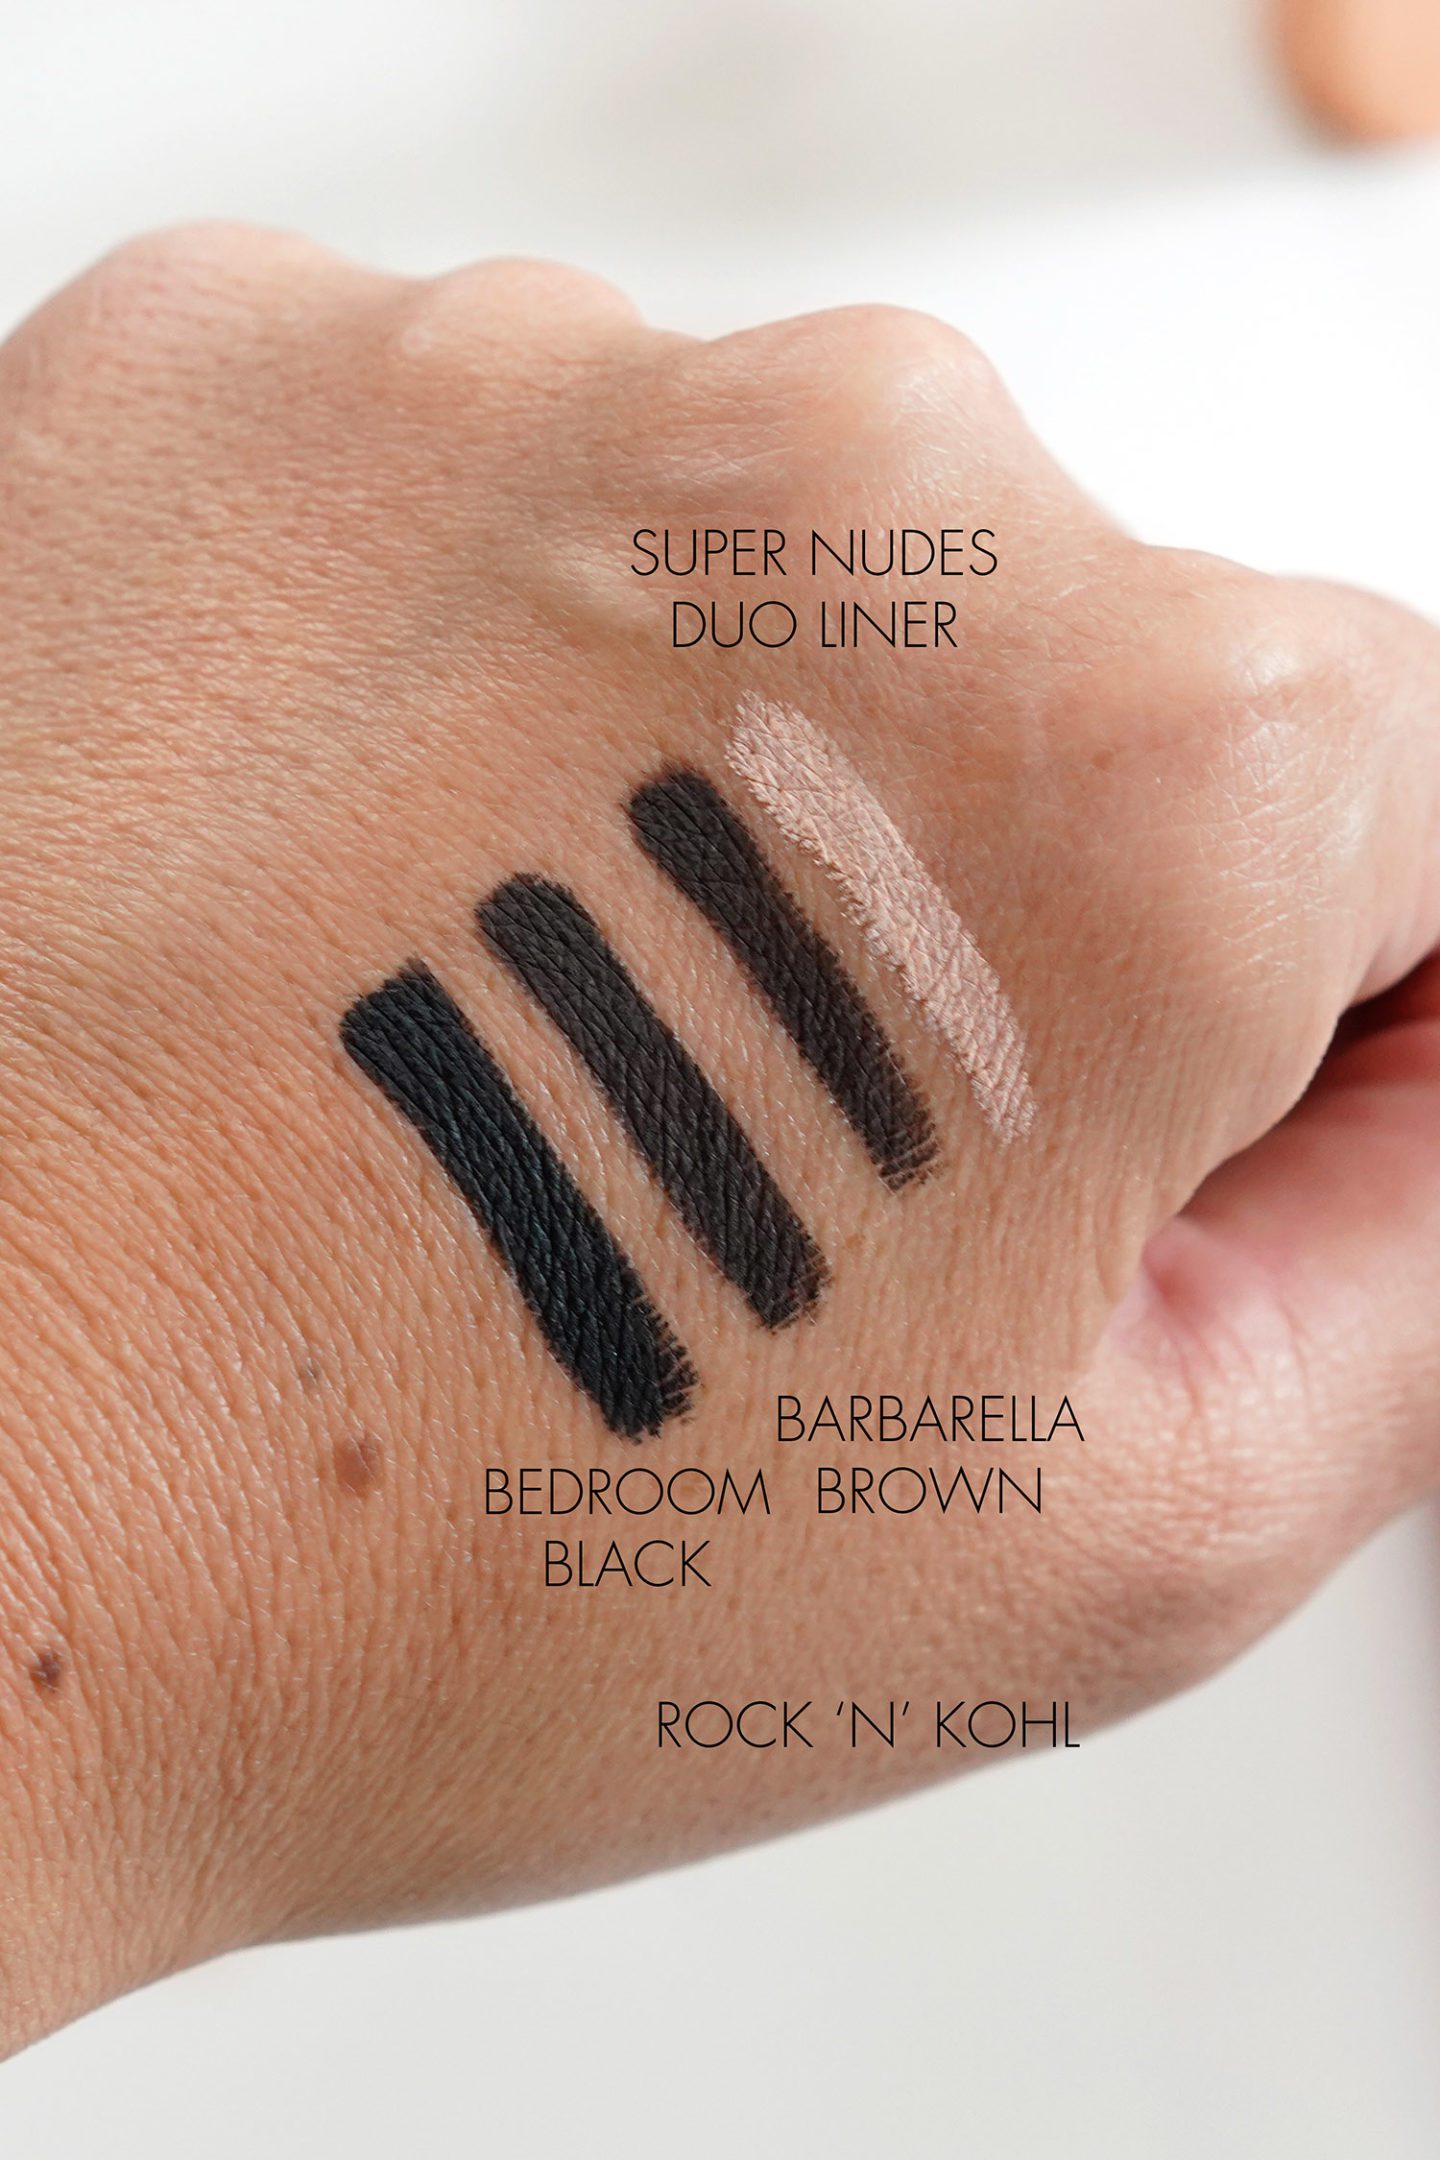 Charlotte Tilbury Super Nudes Duo Liner swatches | The Beauty Lookbook